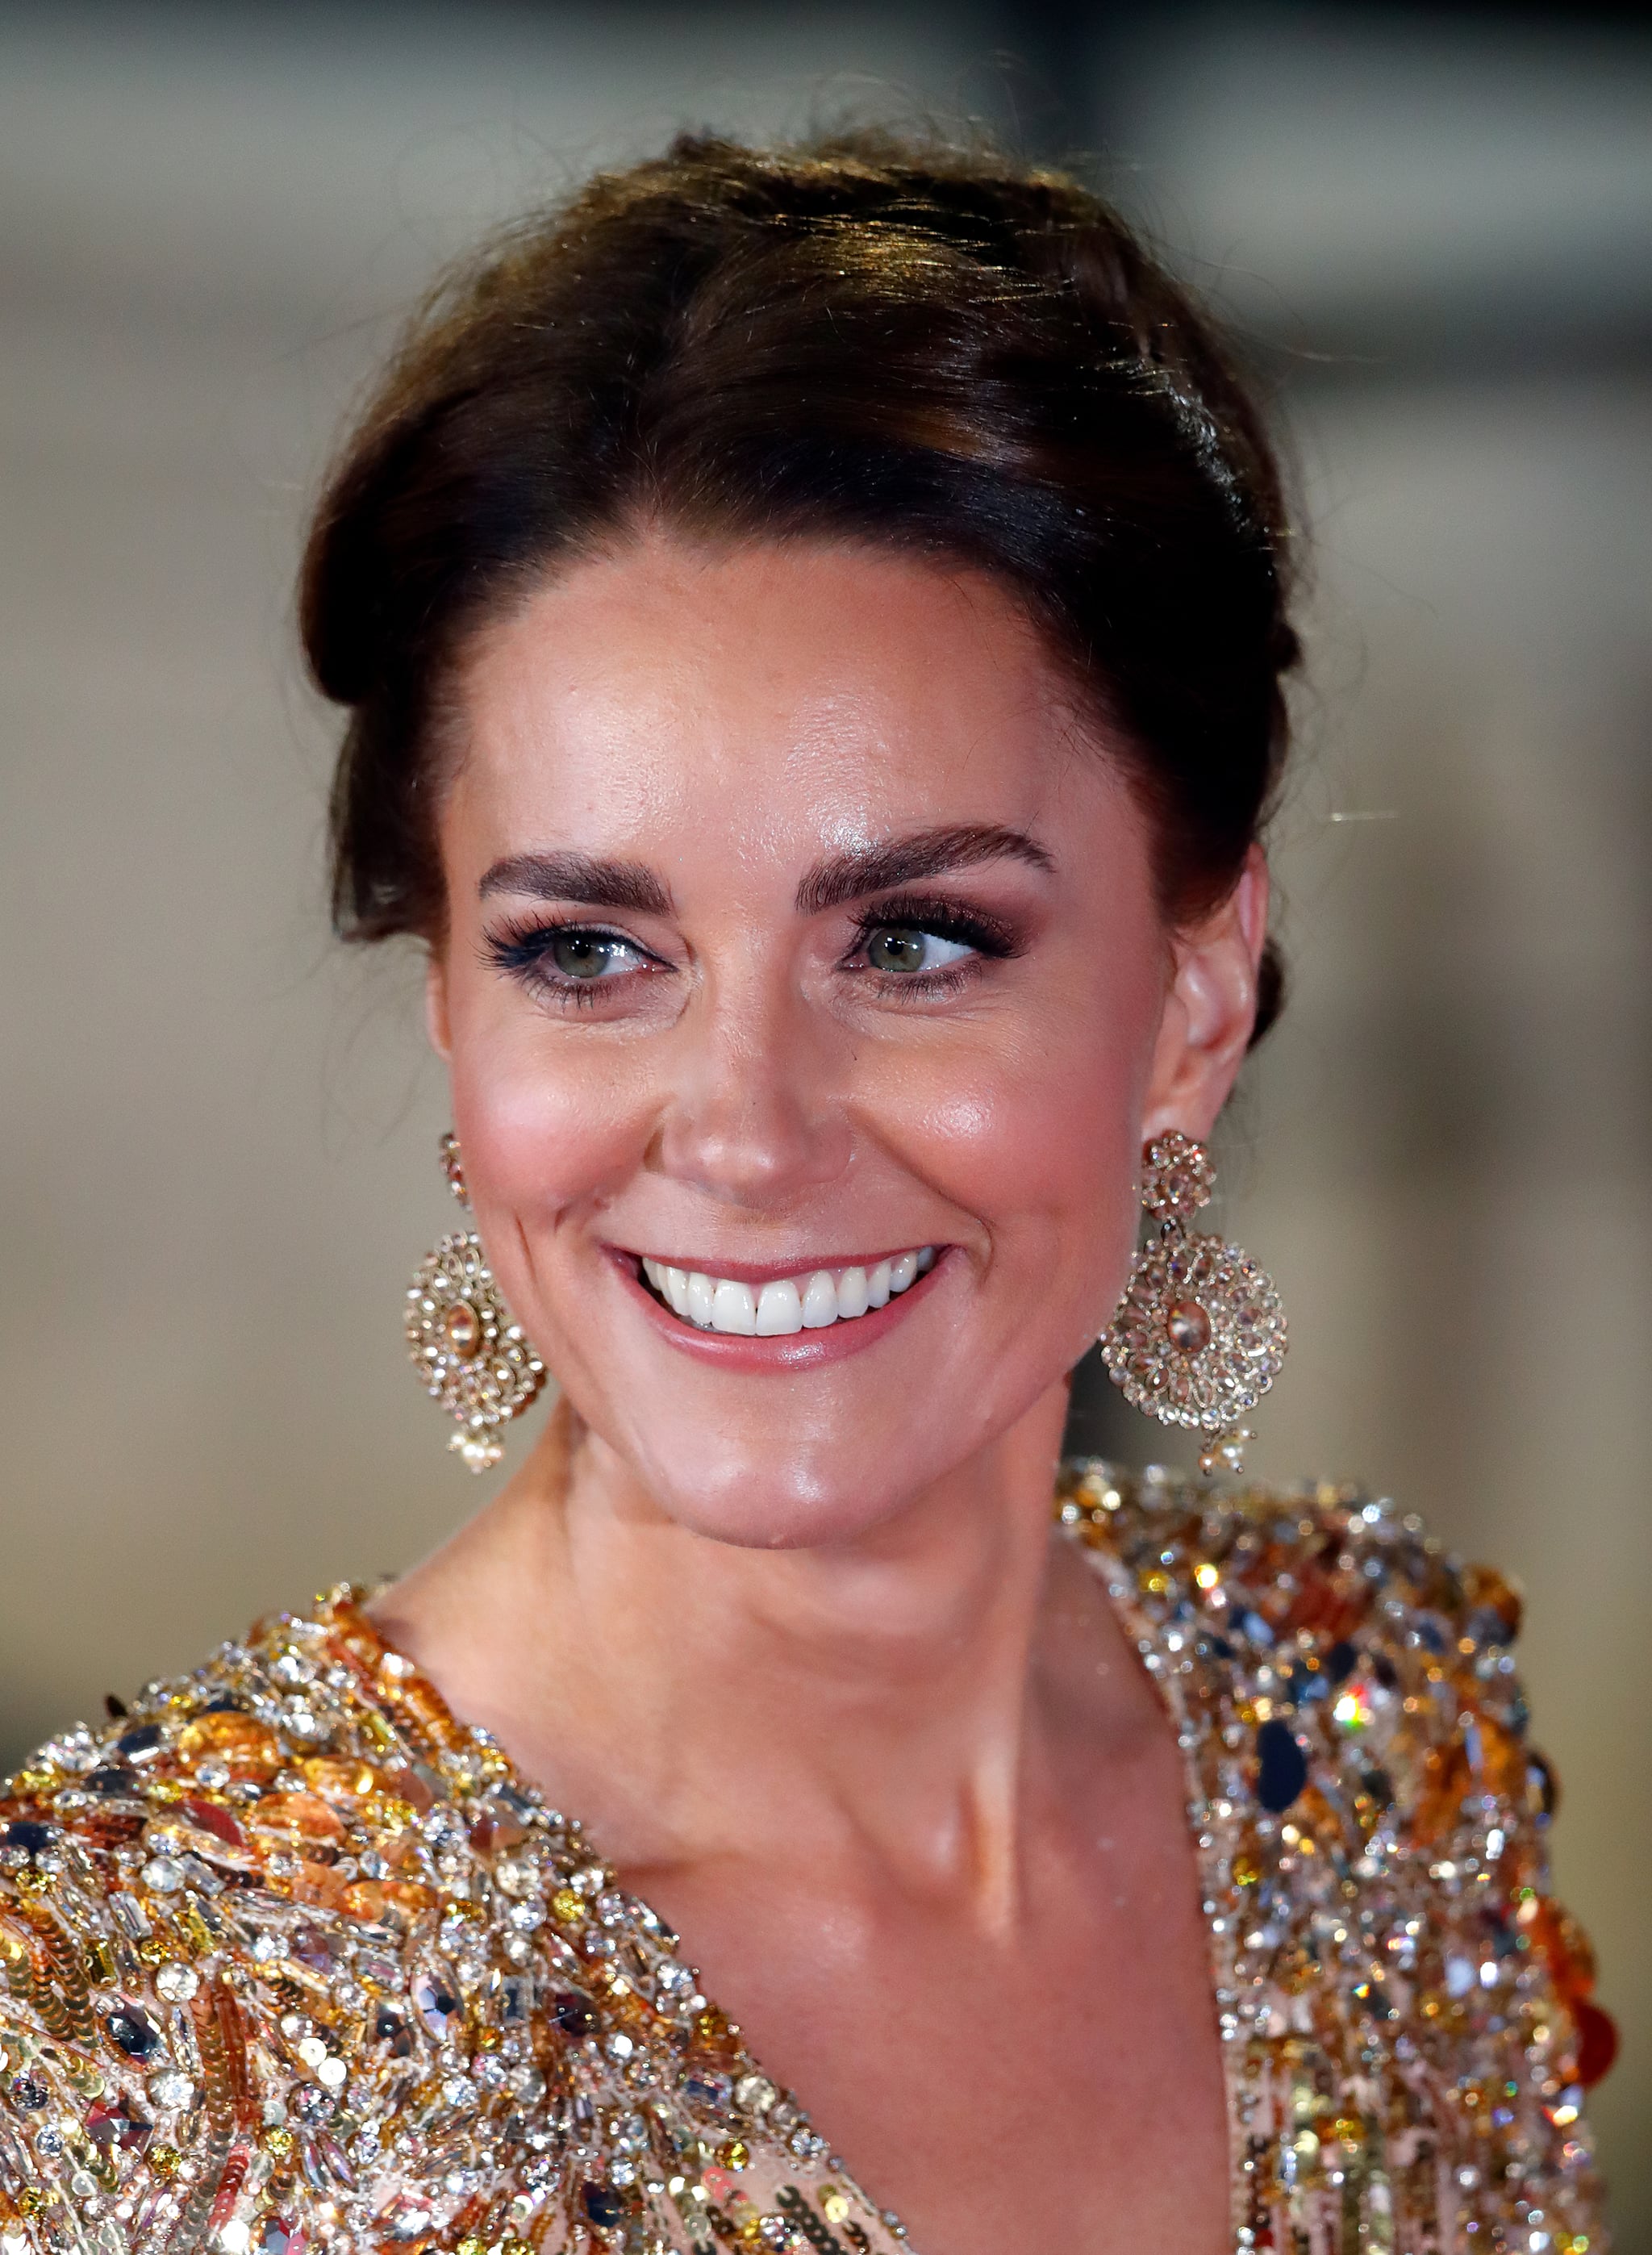 Kate Middleton at the 'No Time To Die' James Bond Premiere